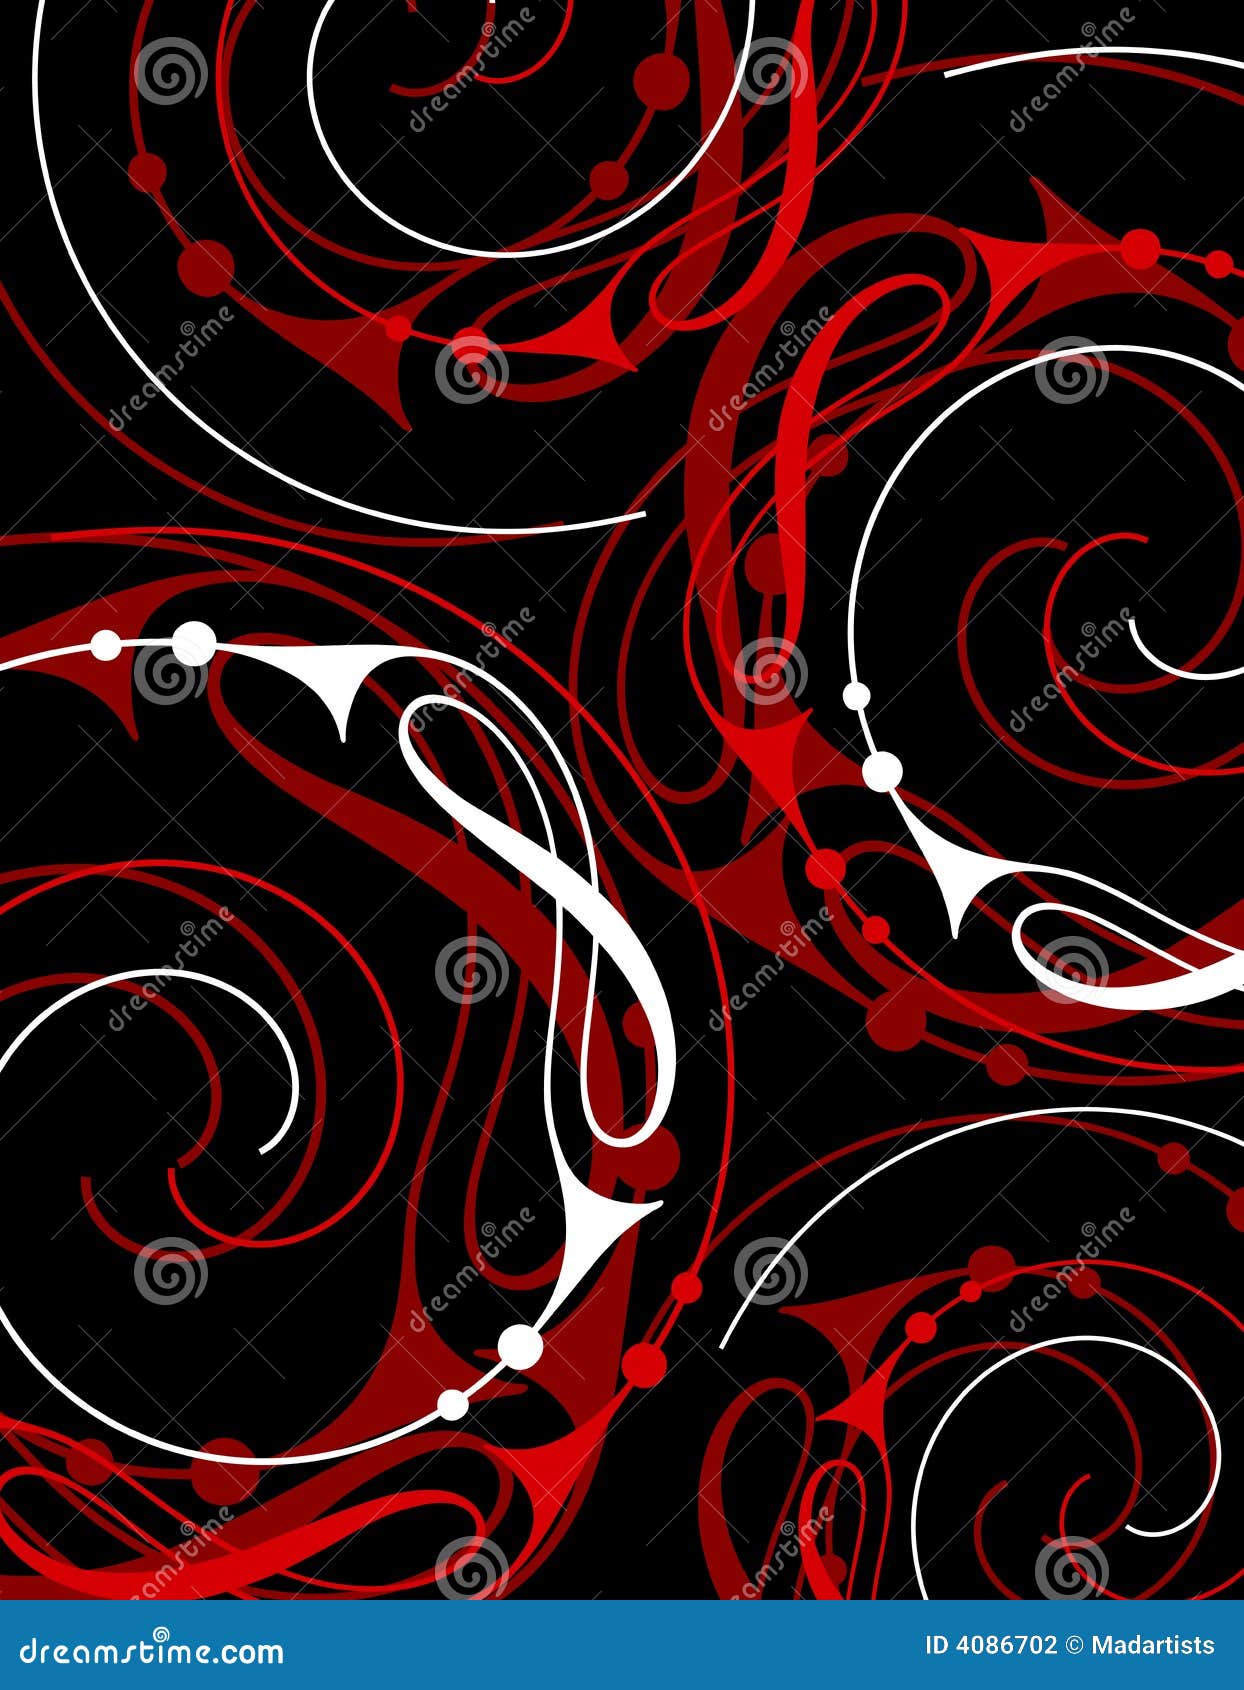 Abstract Black Red Swirls Background Stock Photography ...